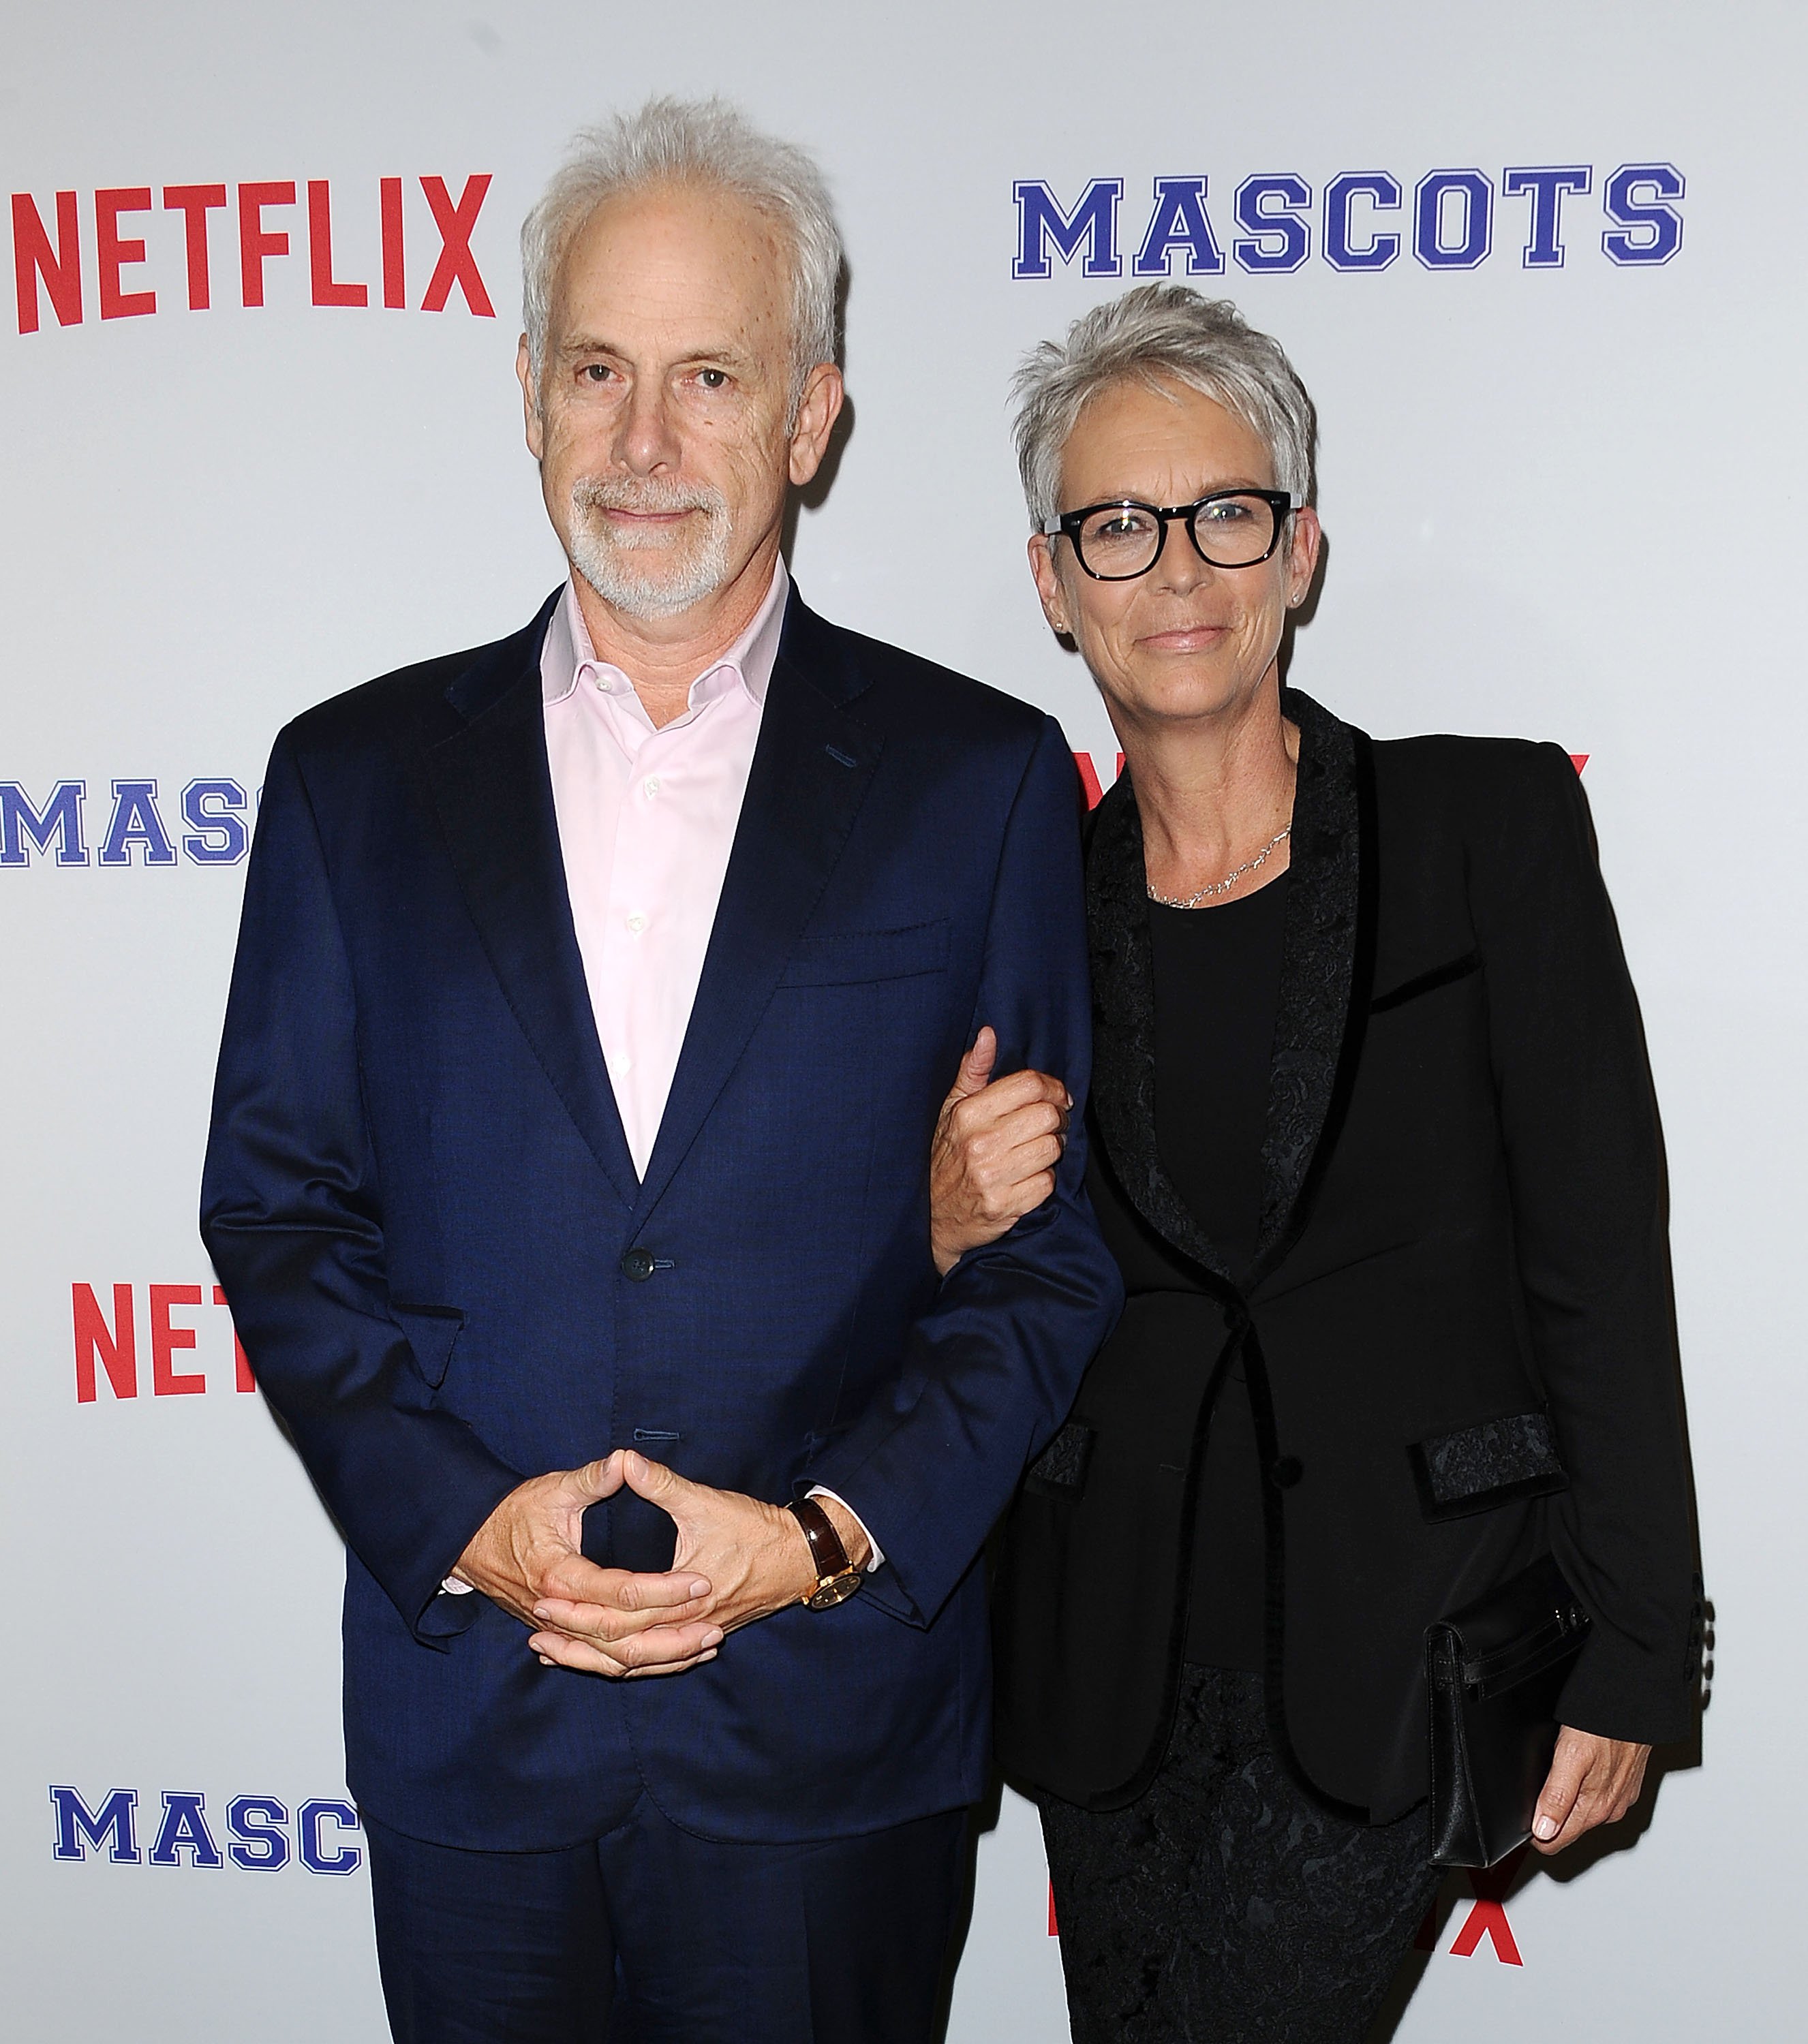 Christopher Guest and Jamie Lee Curtis at a screening of "Mascots" on October 5, 2016, in Los Angeles, California | Source: Getty Images